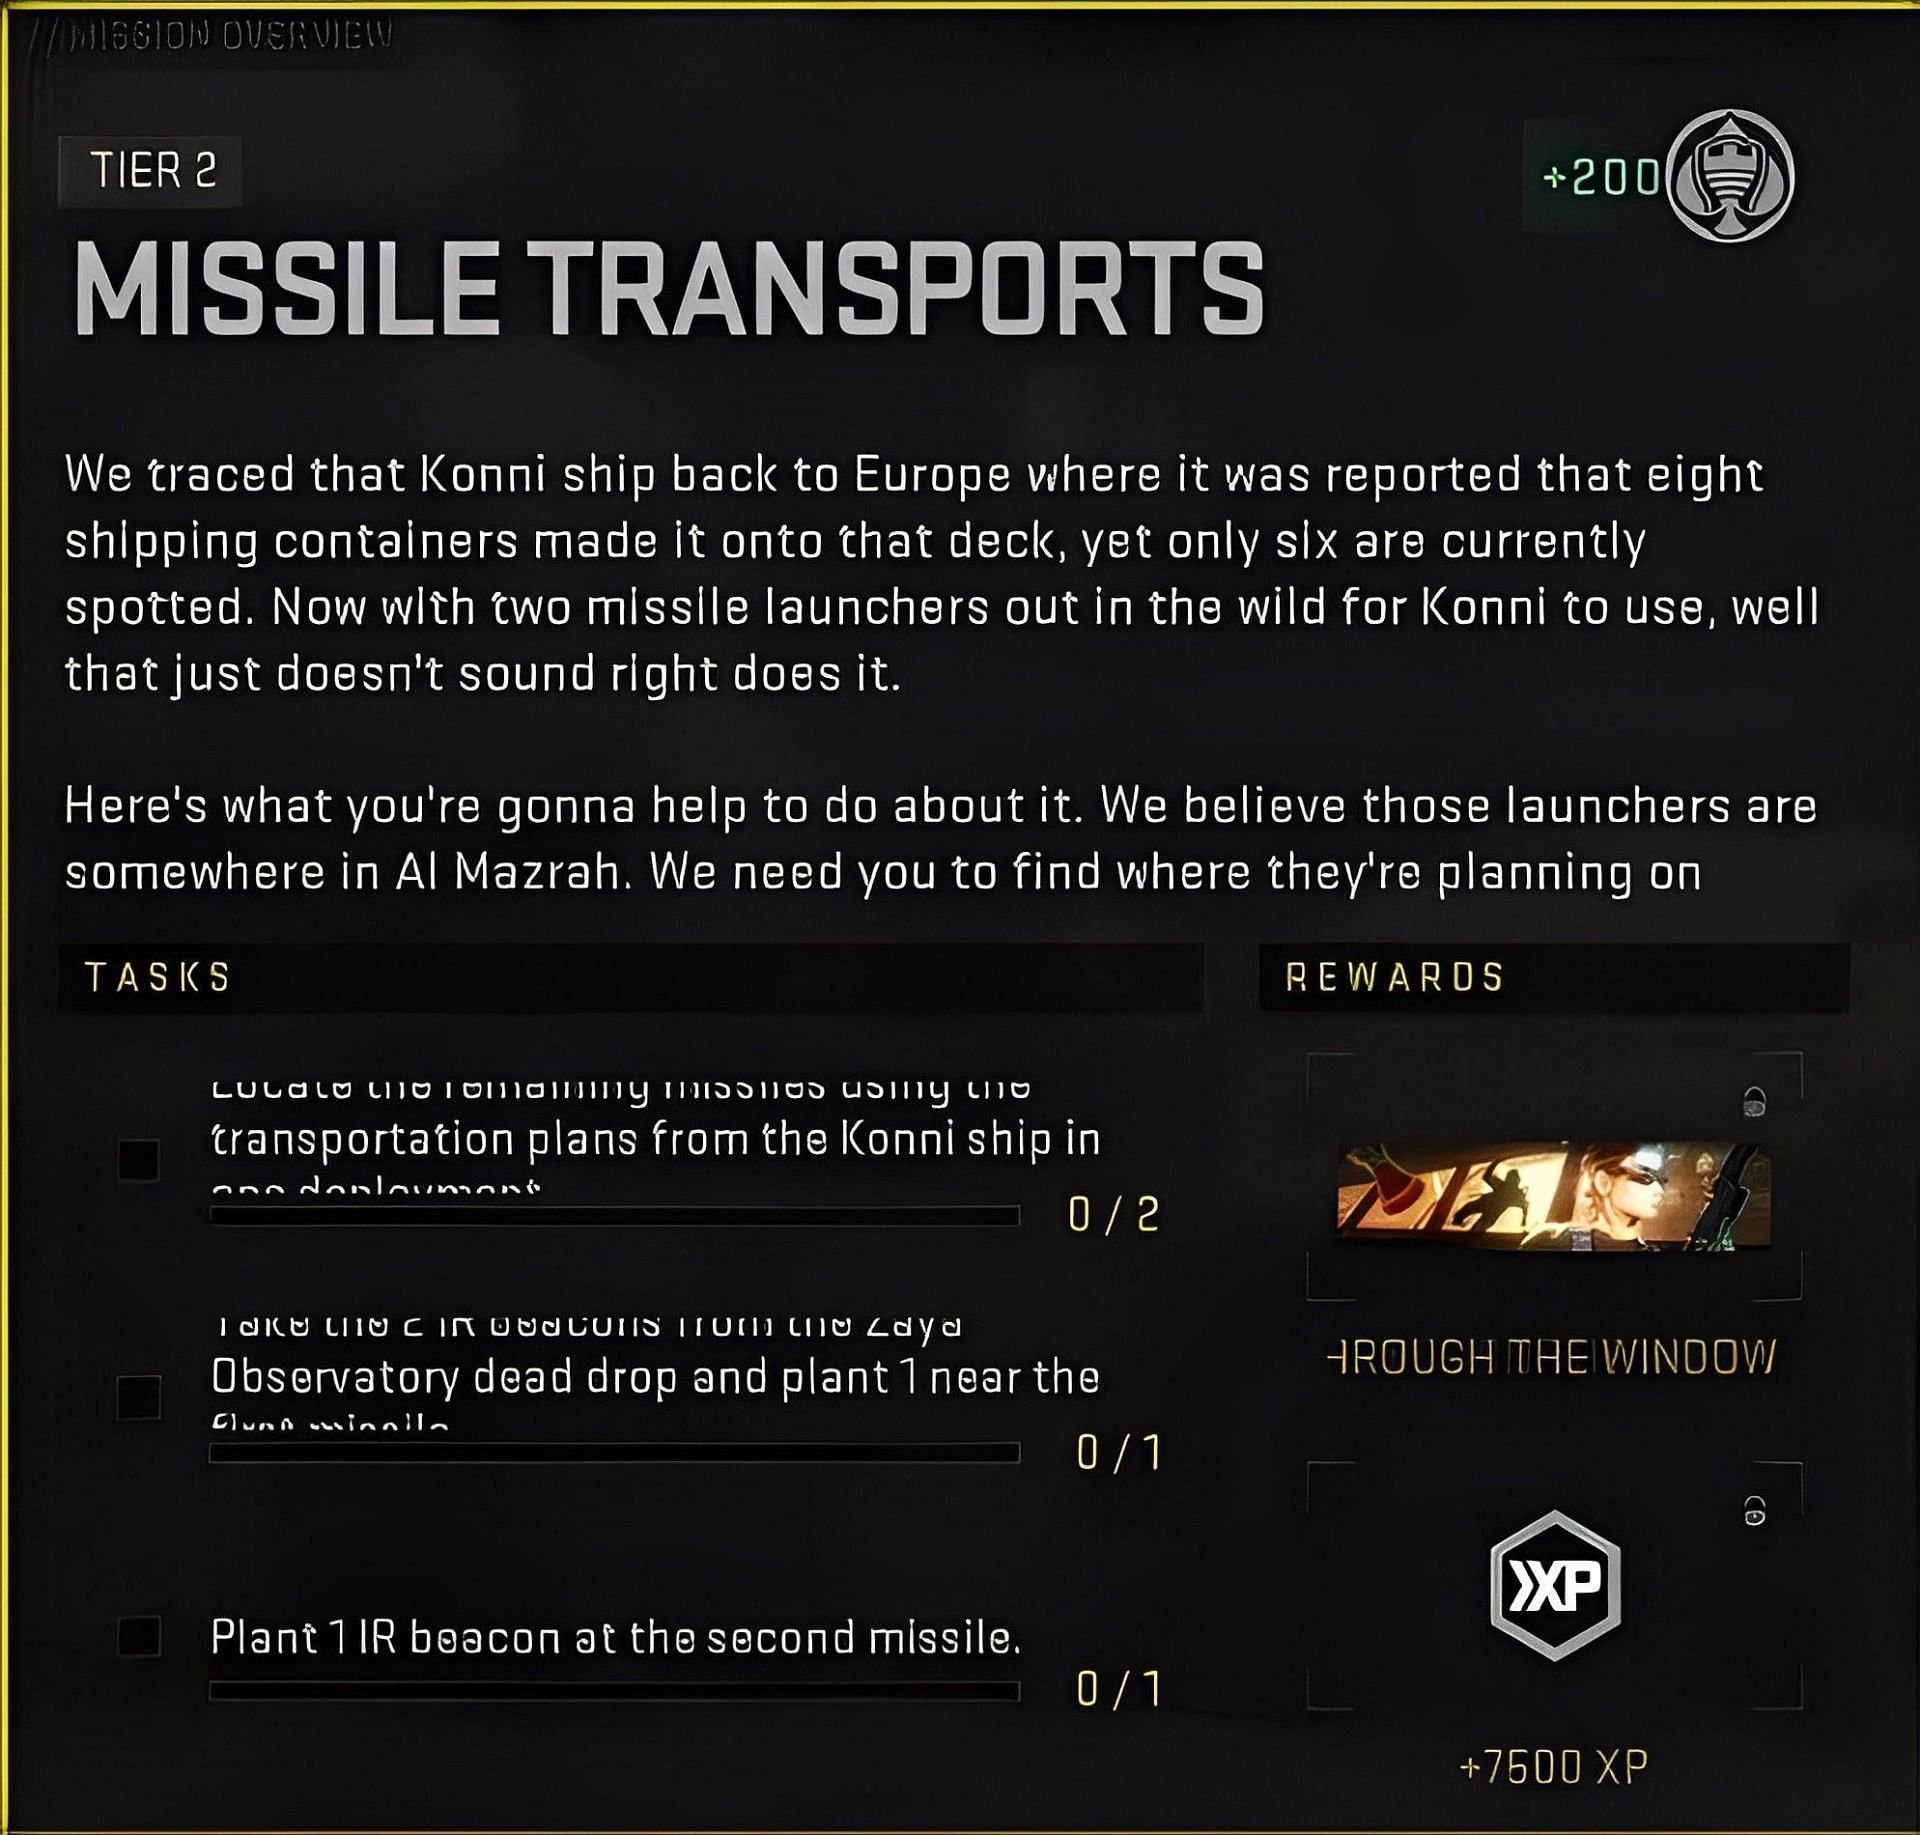 Tasks involved in the Missile Transports mission (Image via Activision)